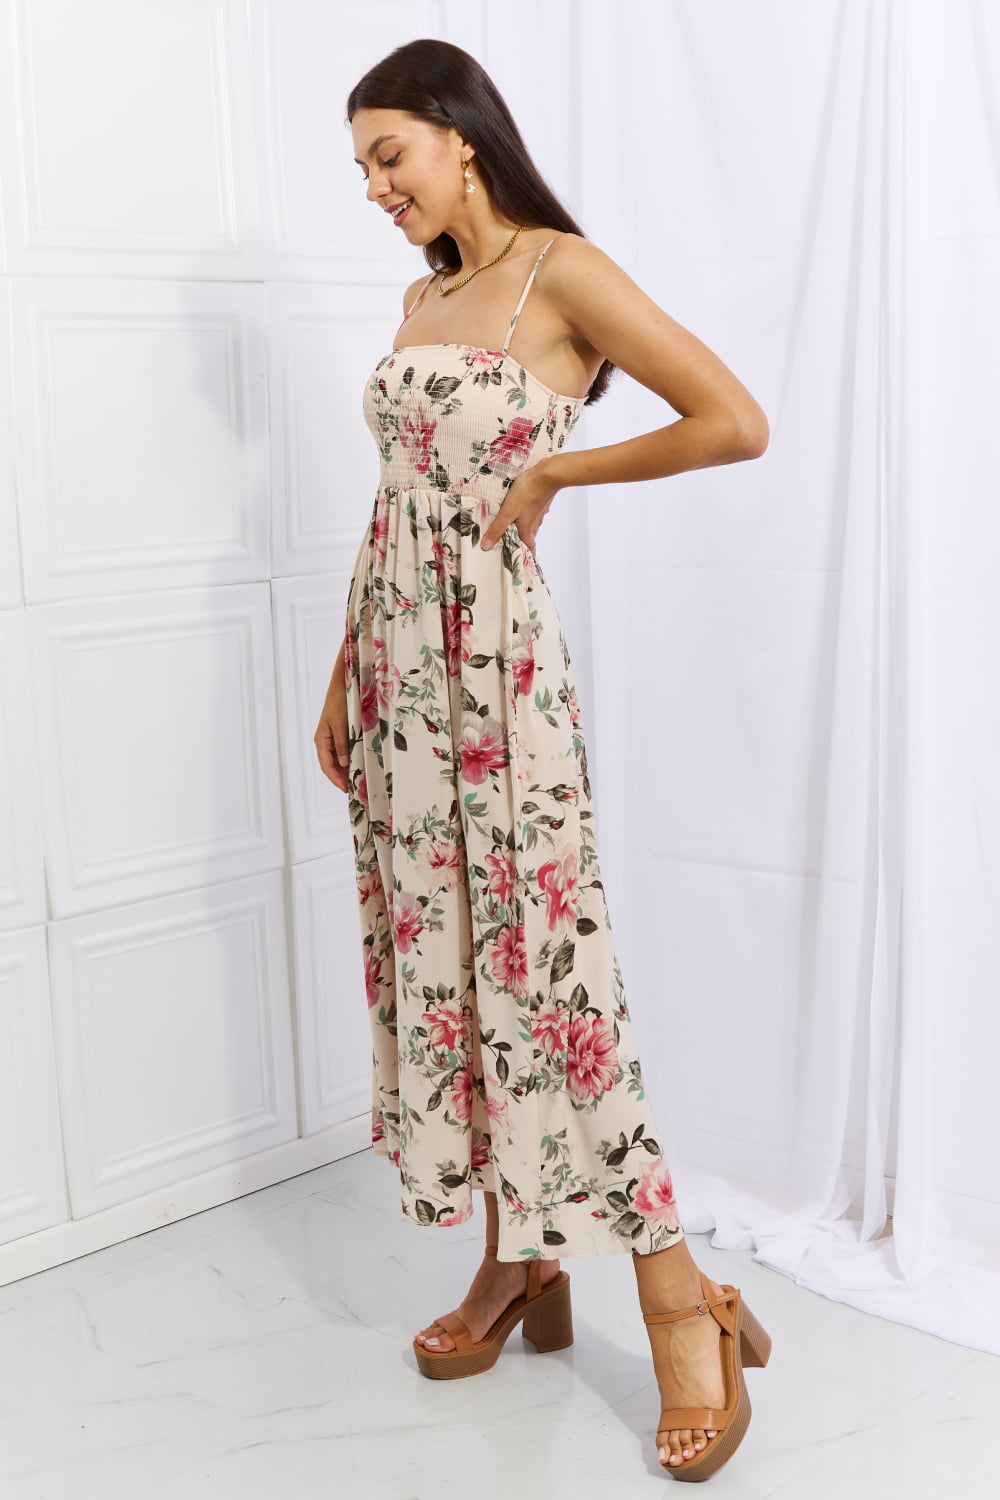 Hold Me Tight Sleeveless Floral Maxi Dress in Pink - All Dresses - Dresses - 3 - 2024